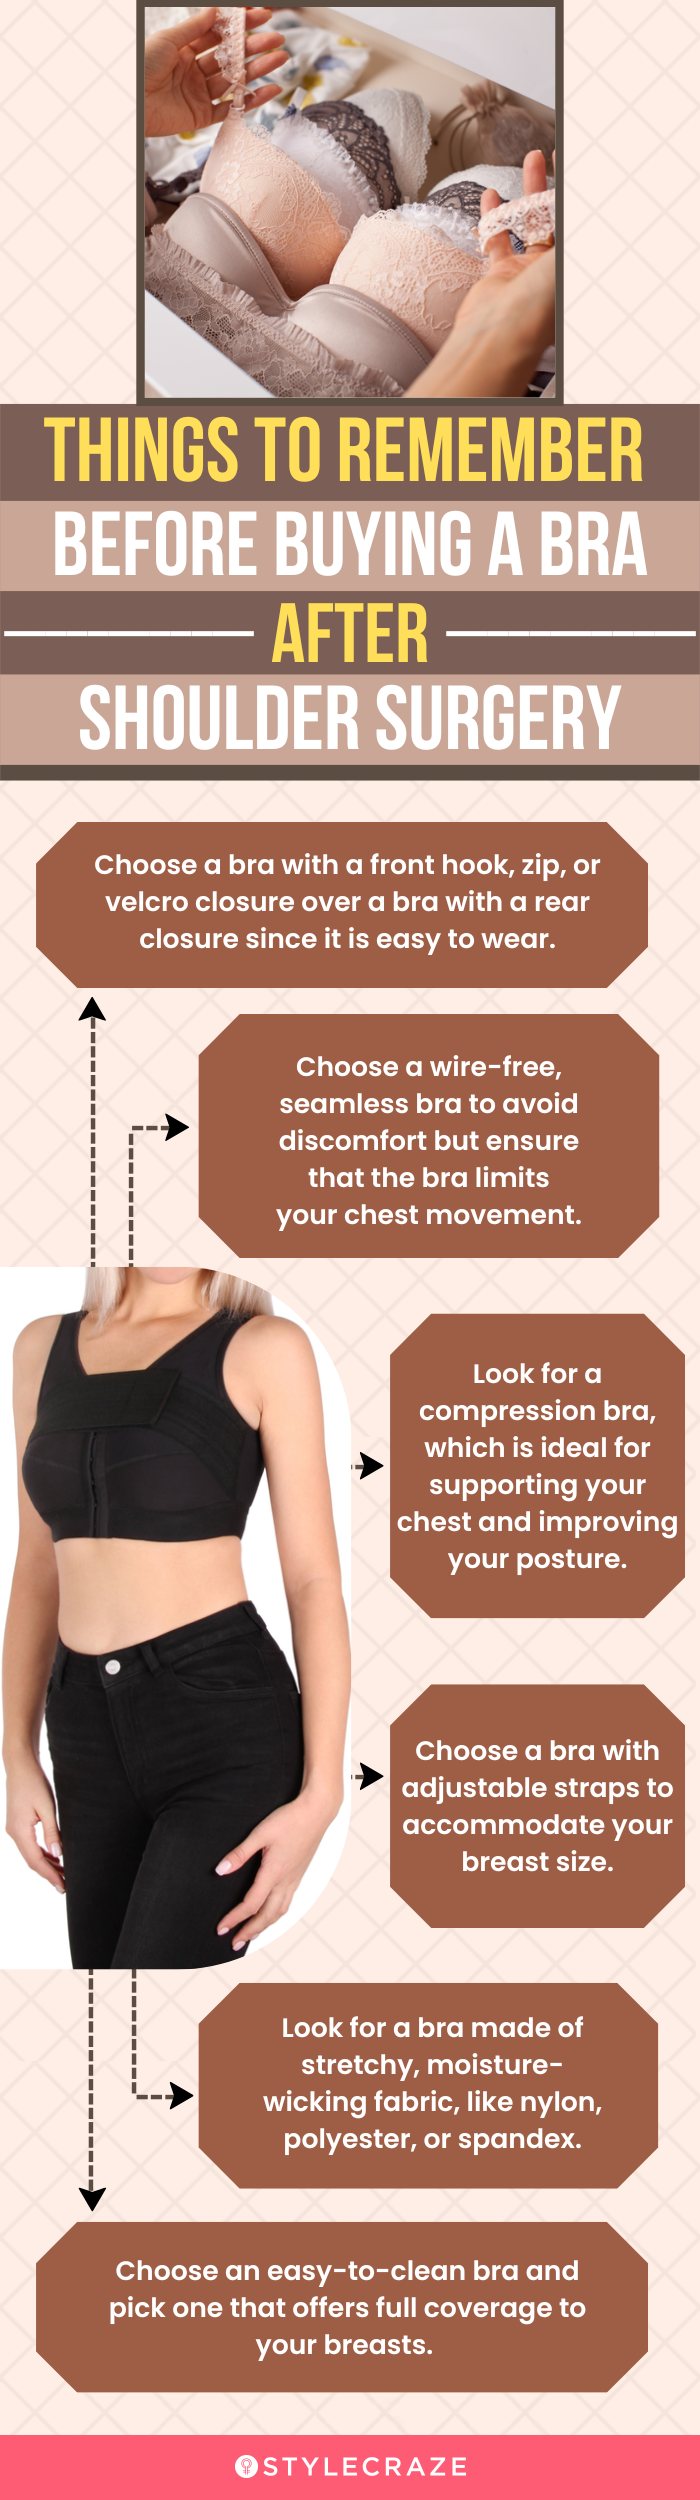 Things To Remember Before Buying A Bra After Shoulder Surgery (infographic)